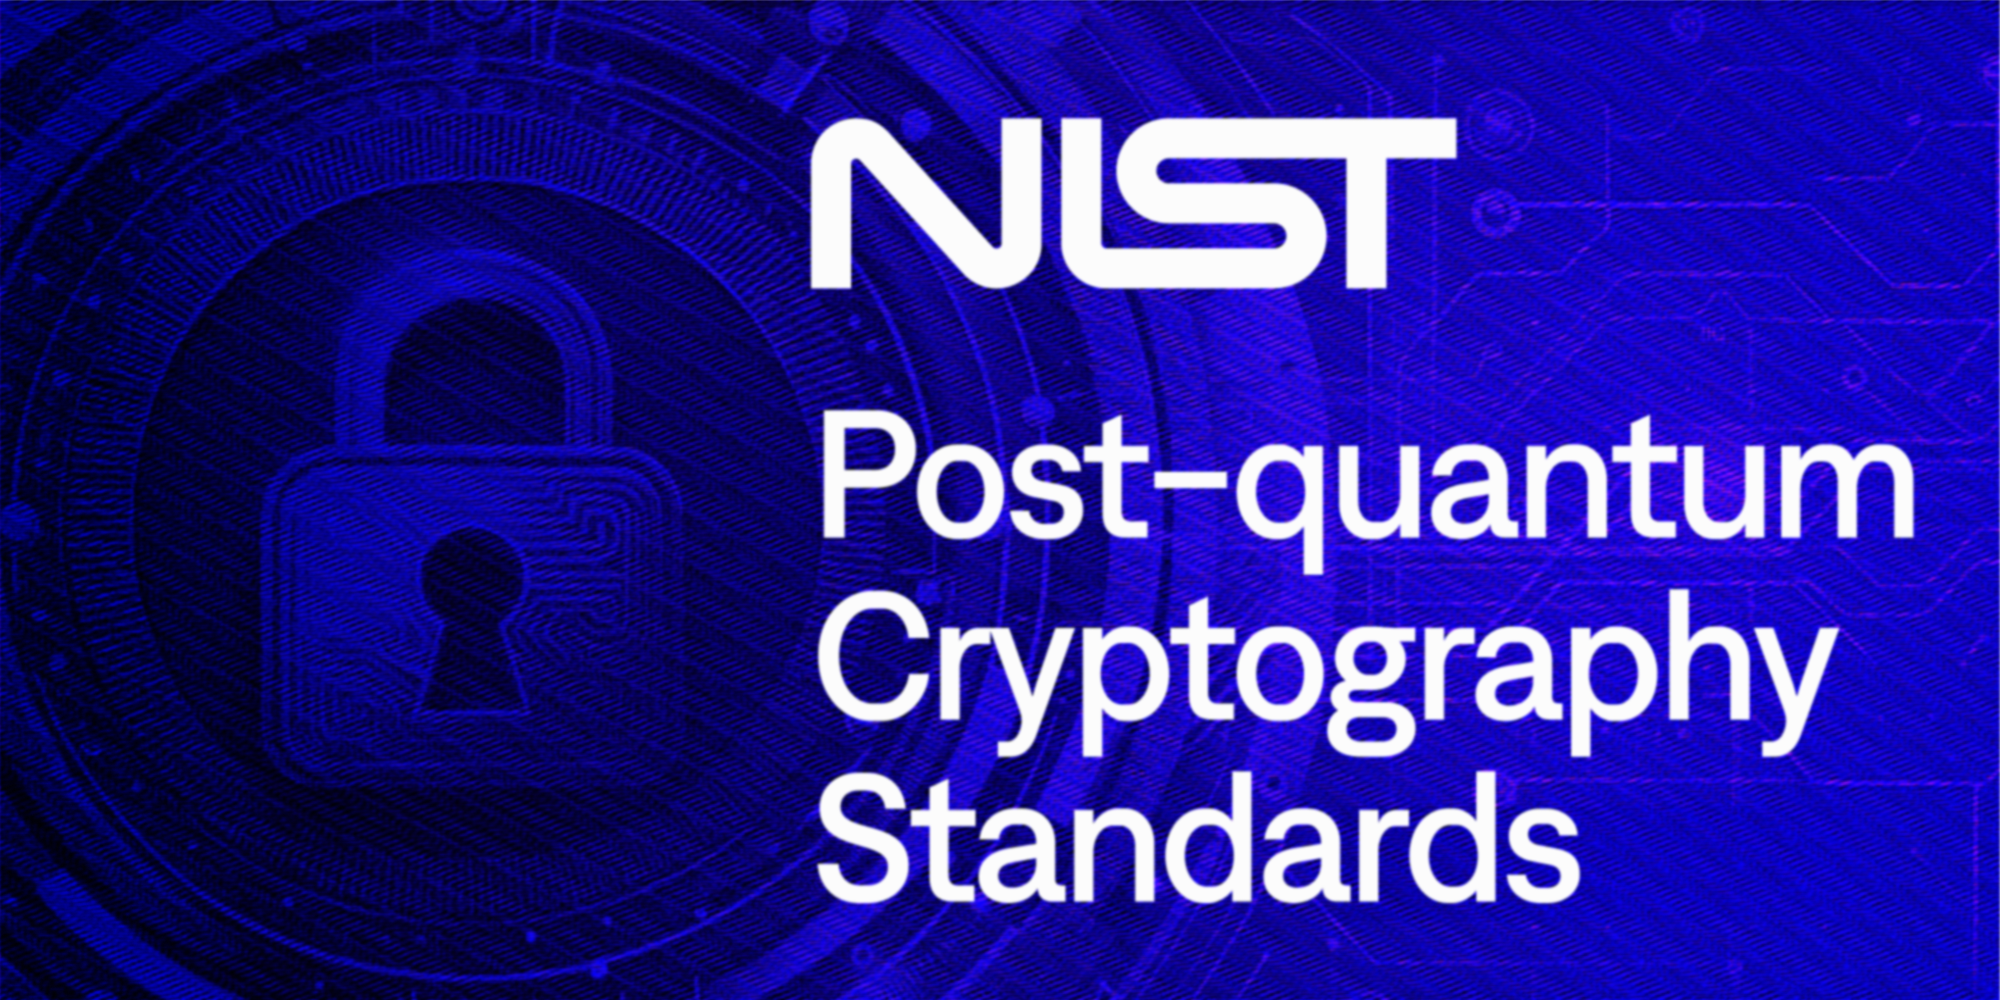 How does the NIST Standardization Process Work?